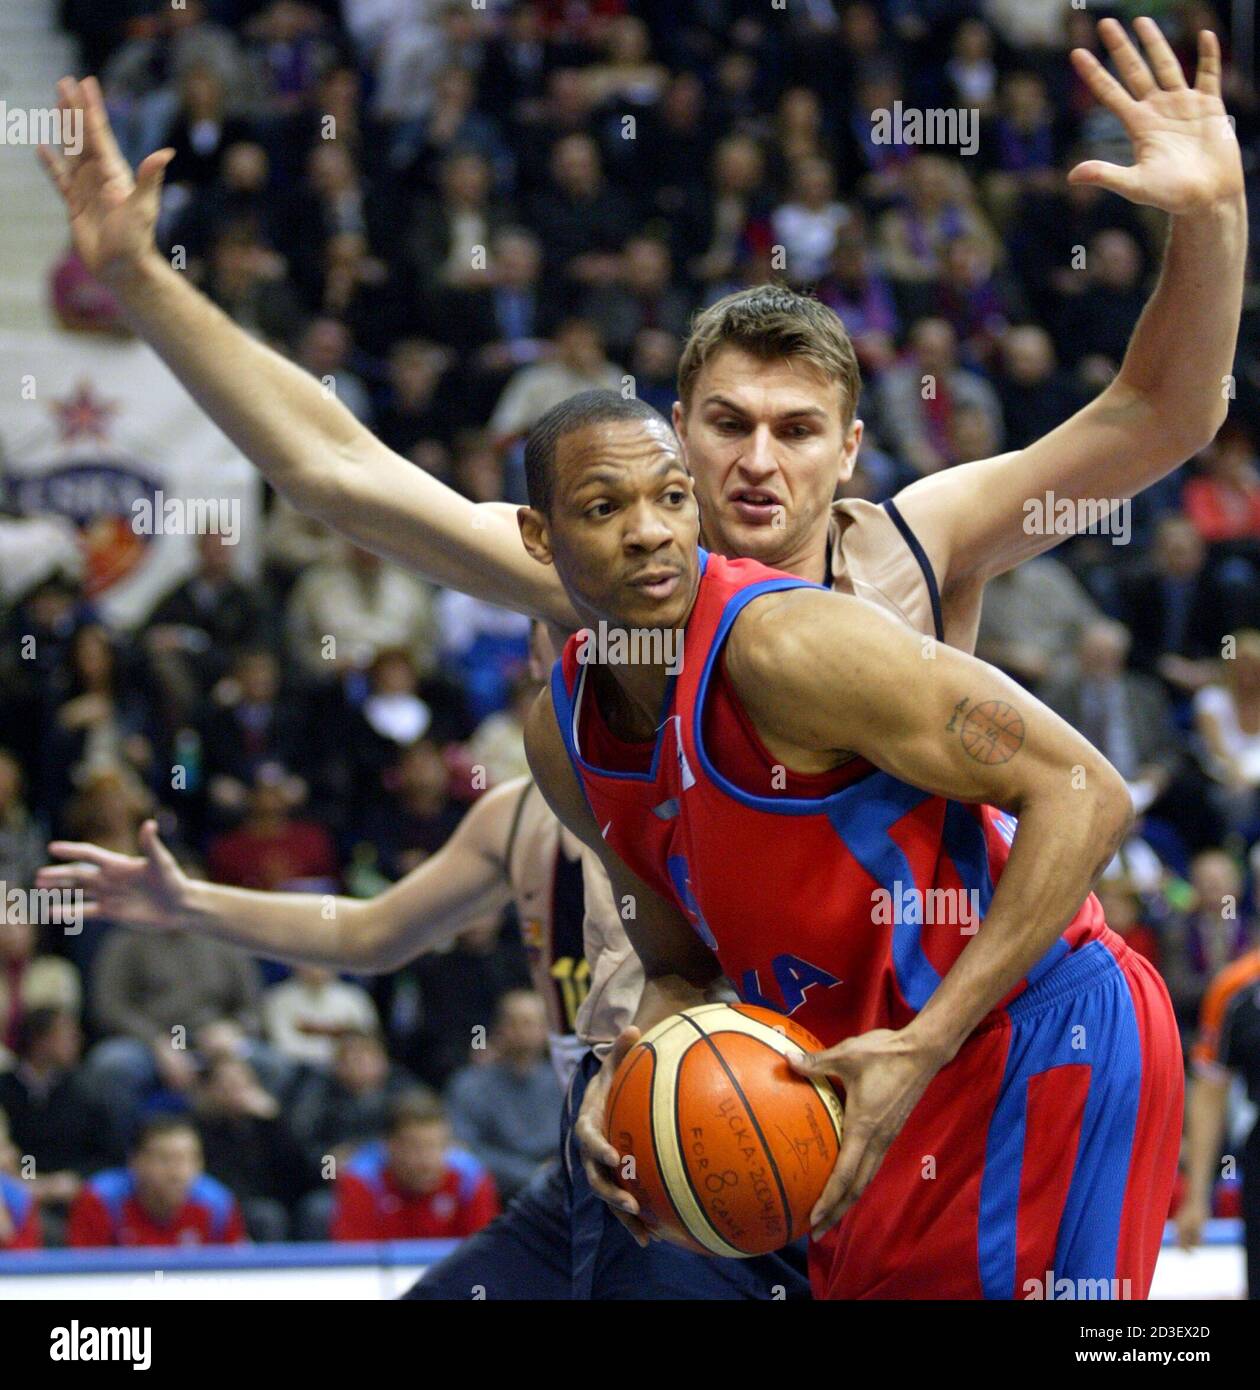 Zizic of FC Barcelona tries to block Brown of CSKA Moscow during the  Basketball Euroleague Top 16 group E match in Moscow. Andrija Zizic (R) of  FC Barcelona tries to block Marcus